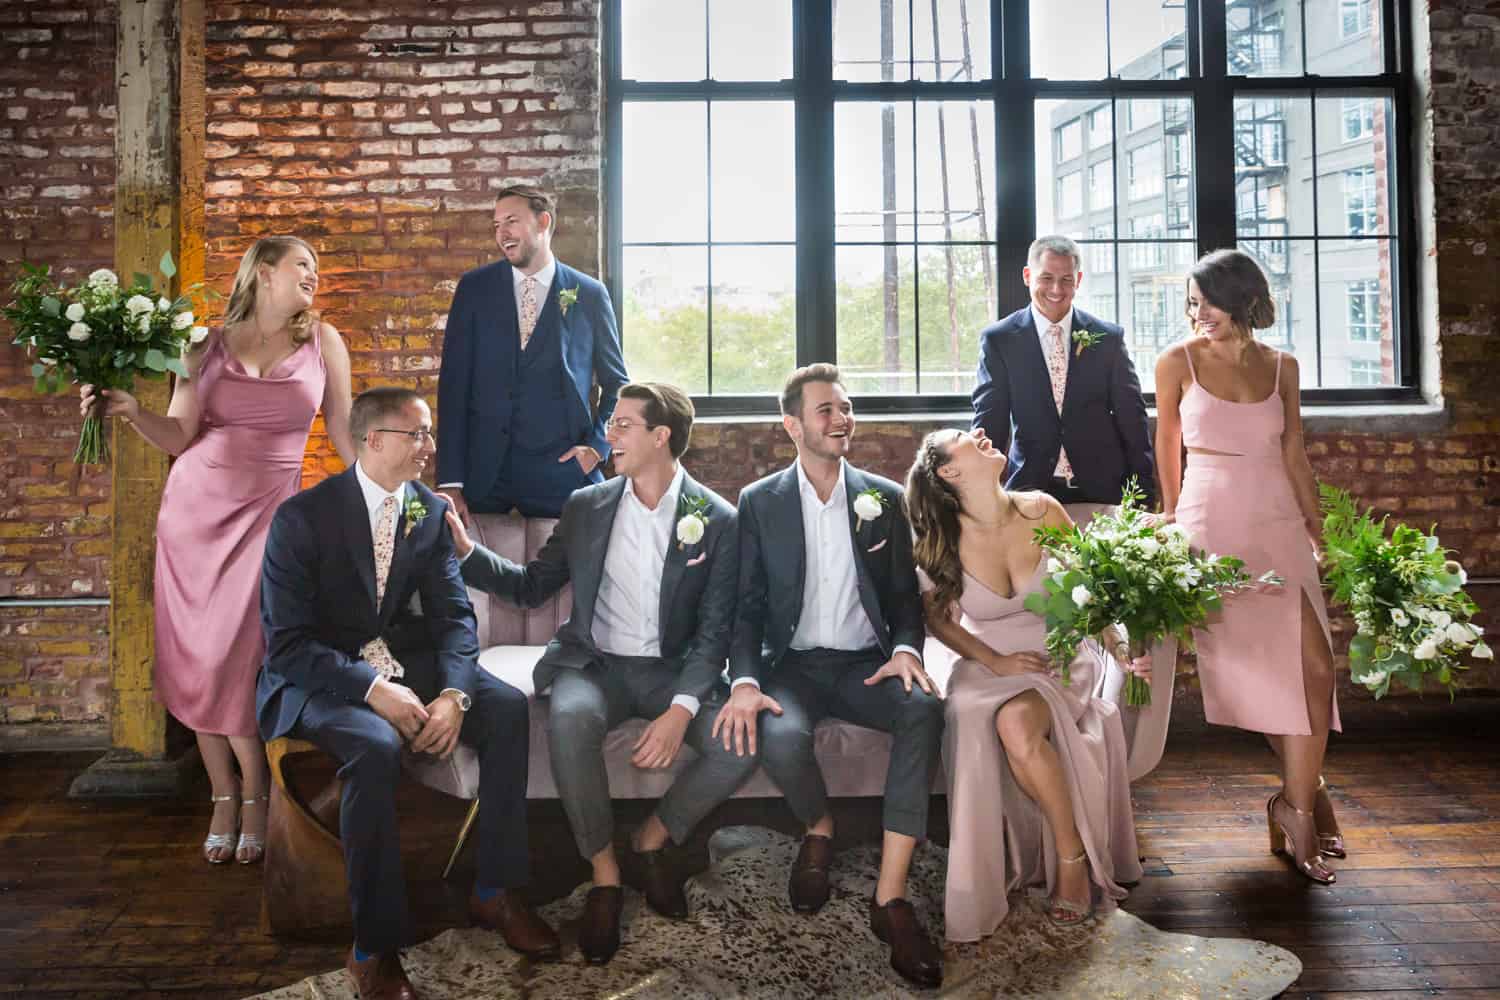 Greenpoint Loft wedding photos of bridal party lounging over couch with window in background